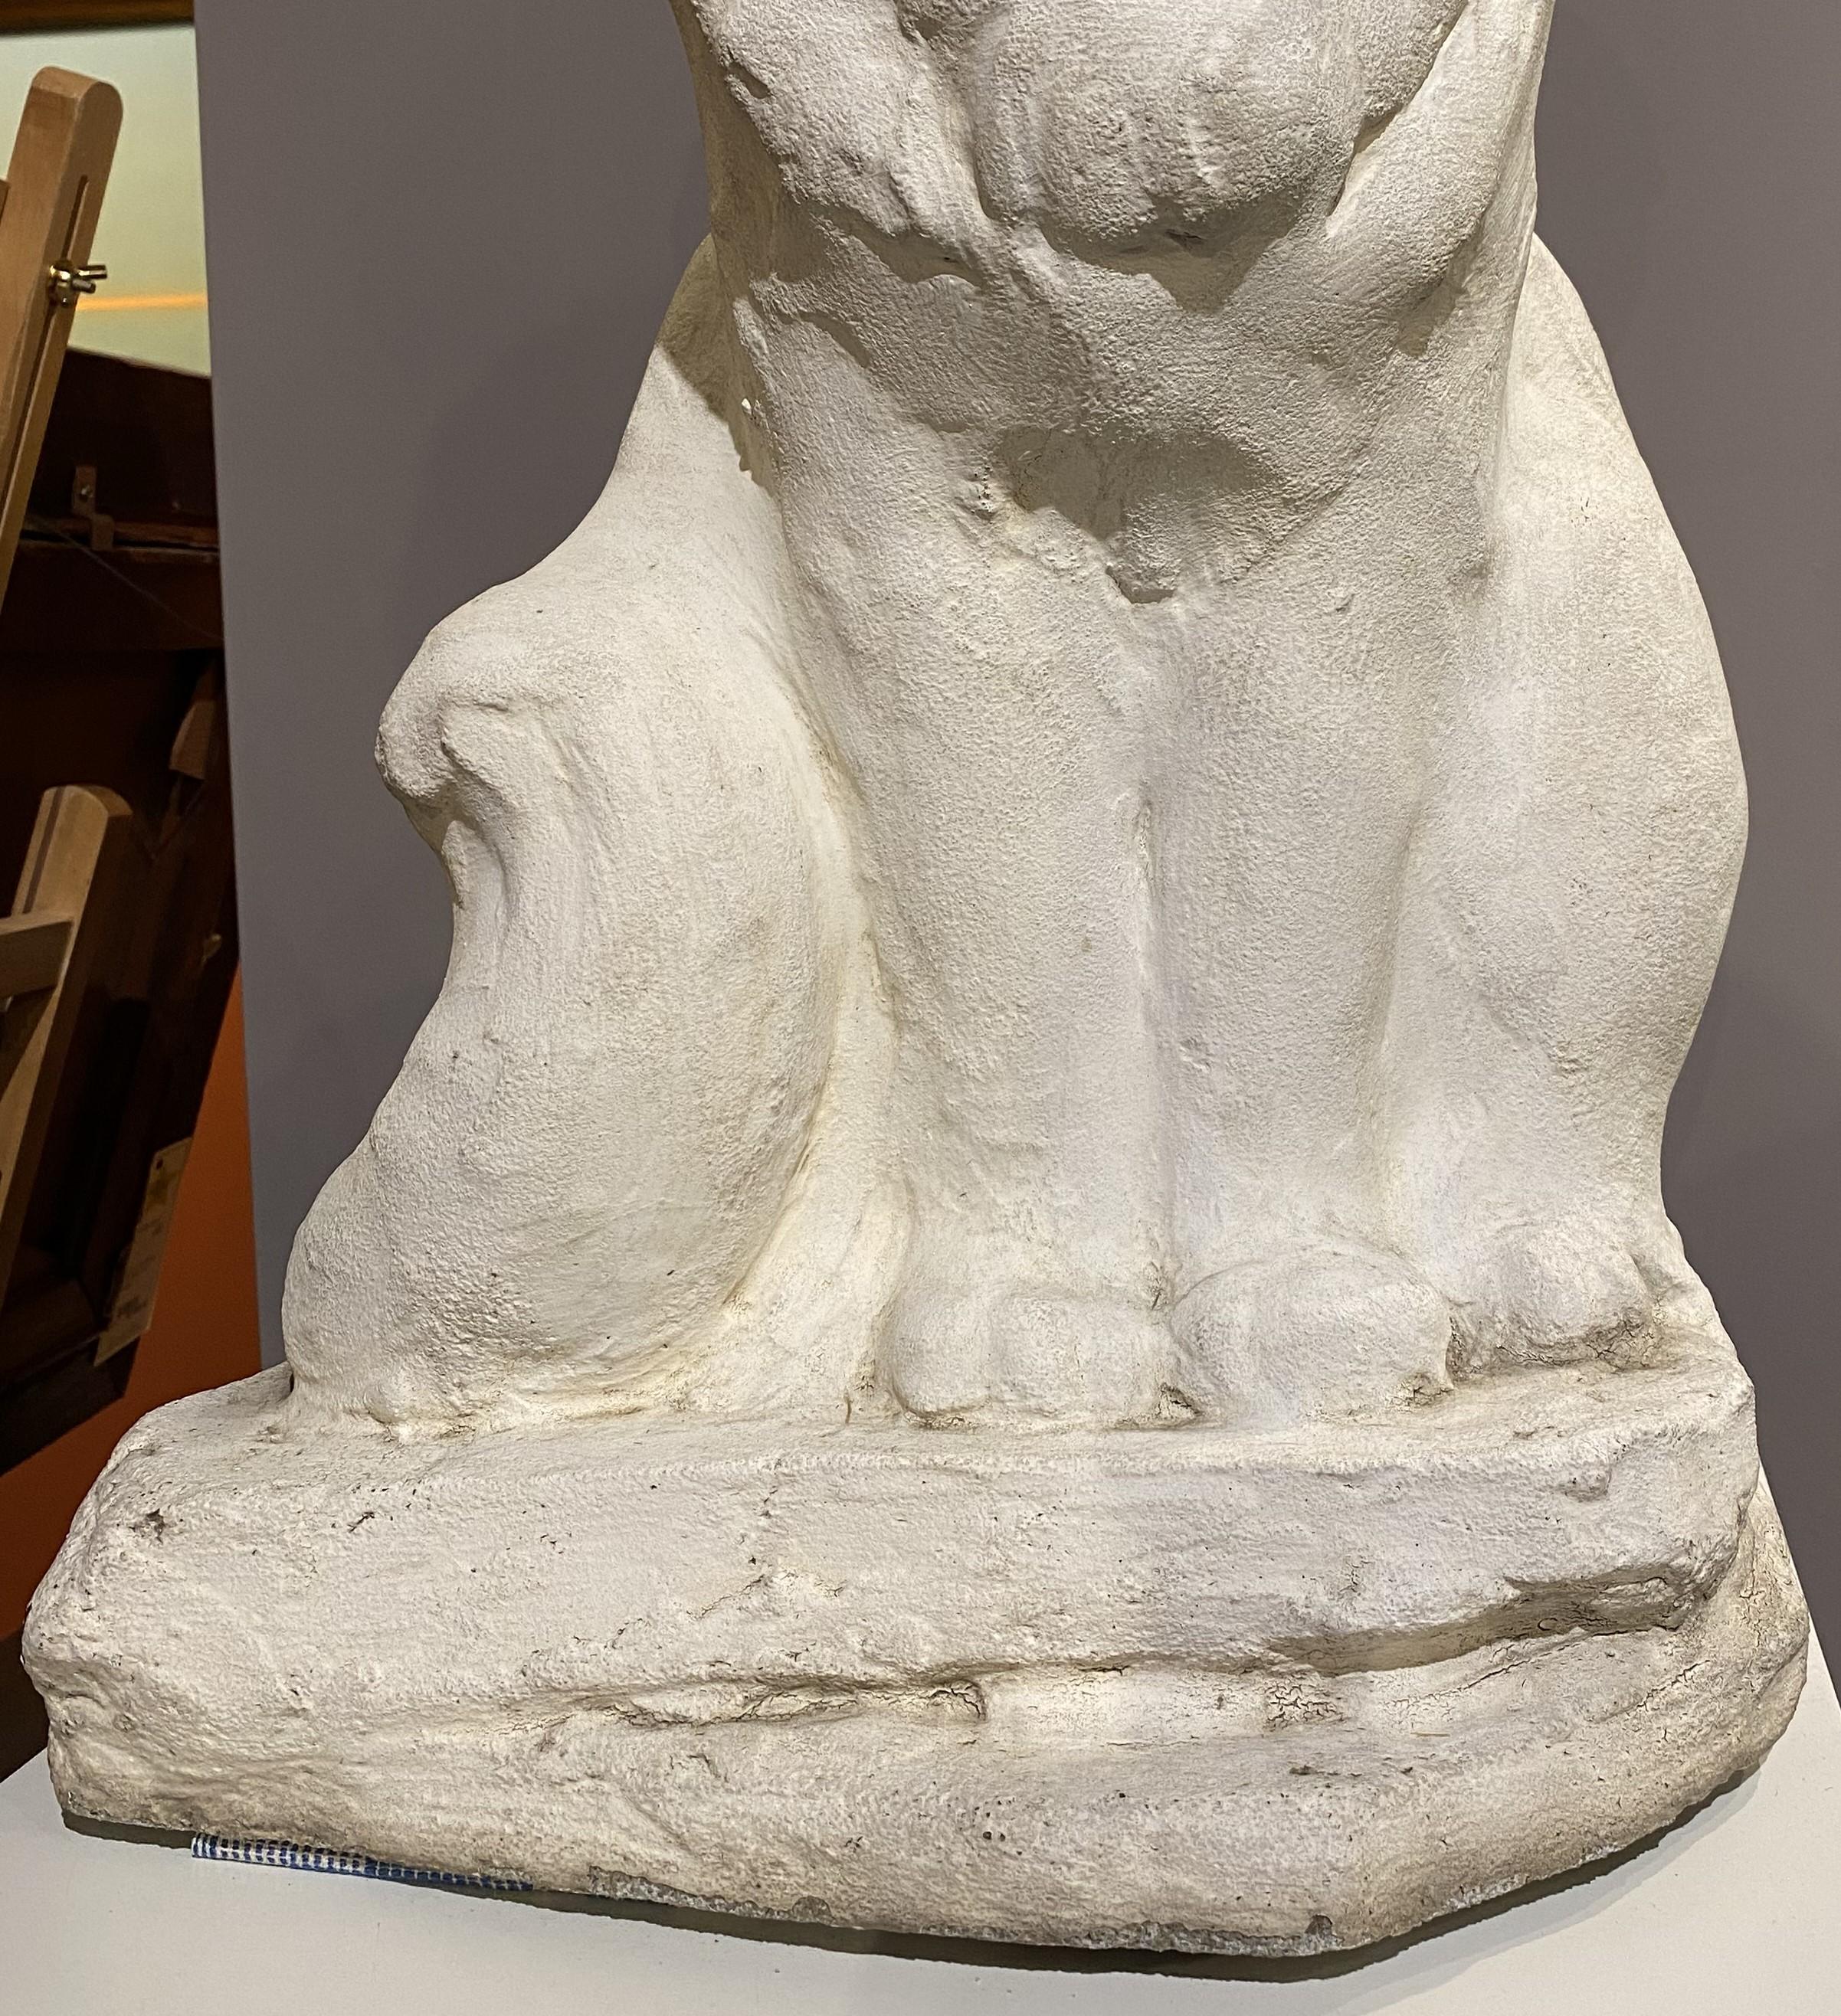 A wonderful cement sculpture cast of the artist’s  Persian cat Pou Pou by American artist Harriet Whitney Frishmuth (1880-1970). Harriet was born in Philadelphia, PA, and, as a teenager , she studied sculpture in Paris classes (with critiques by